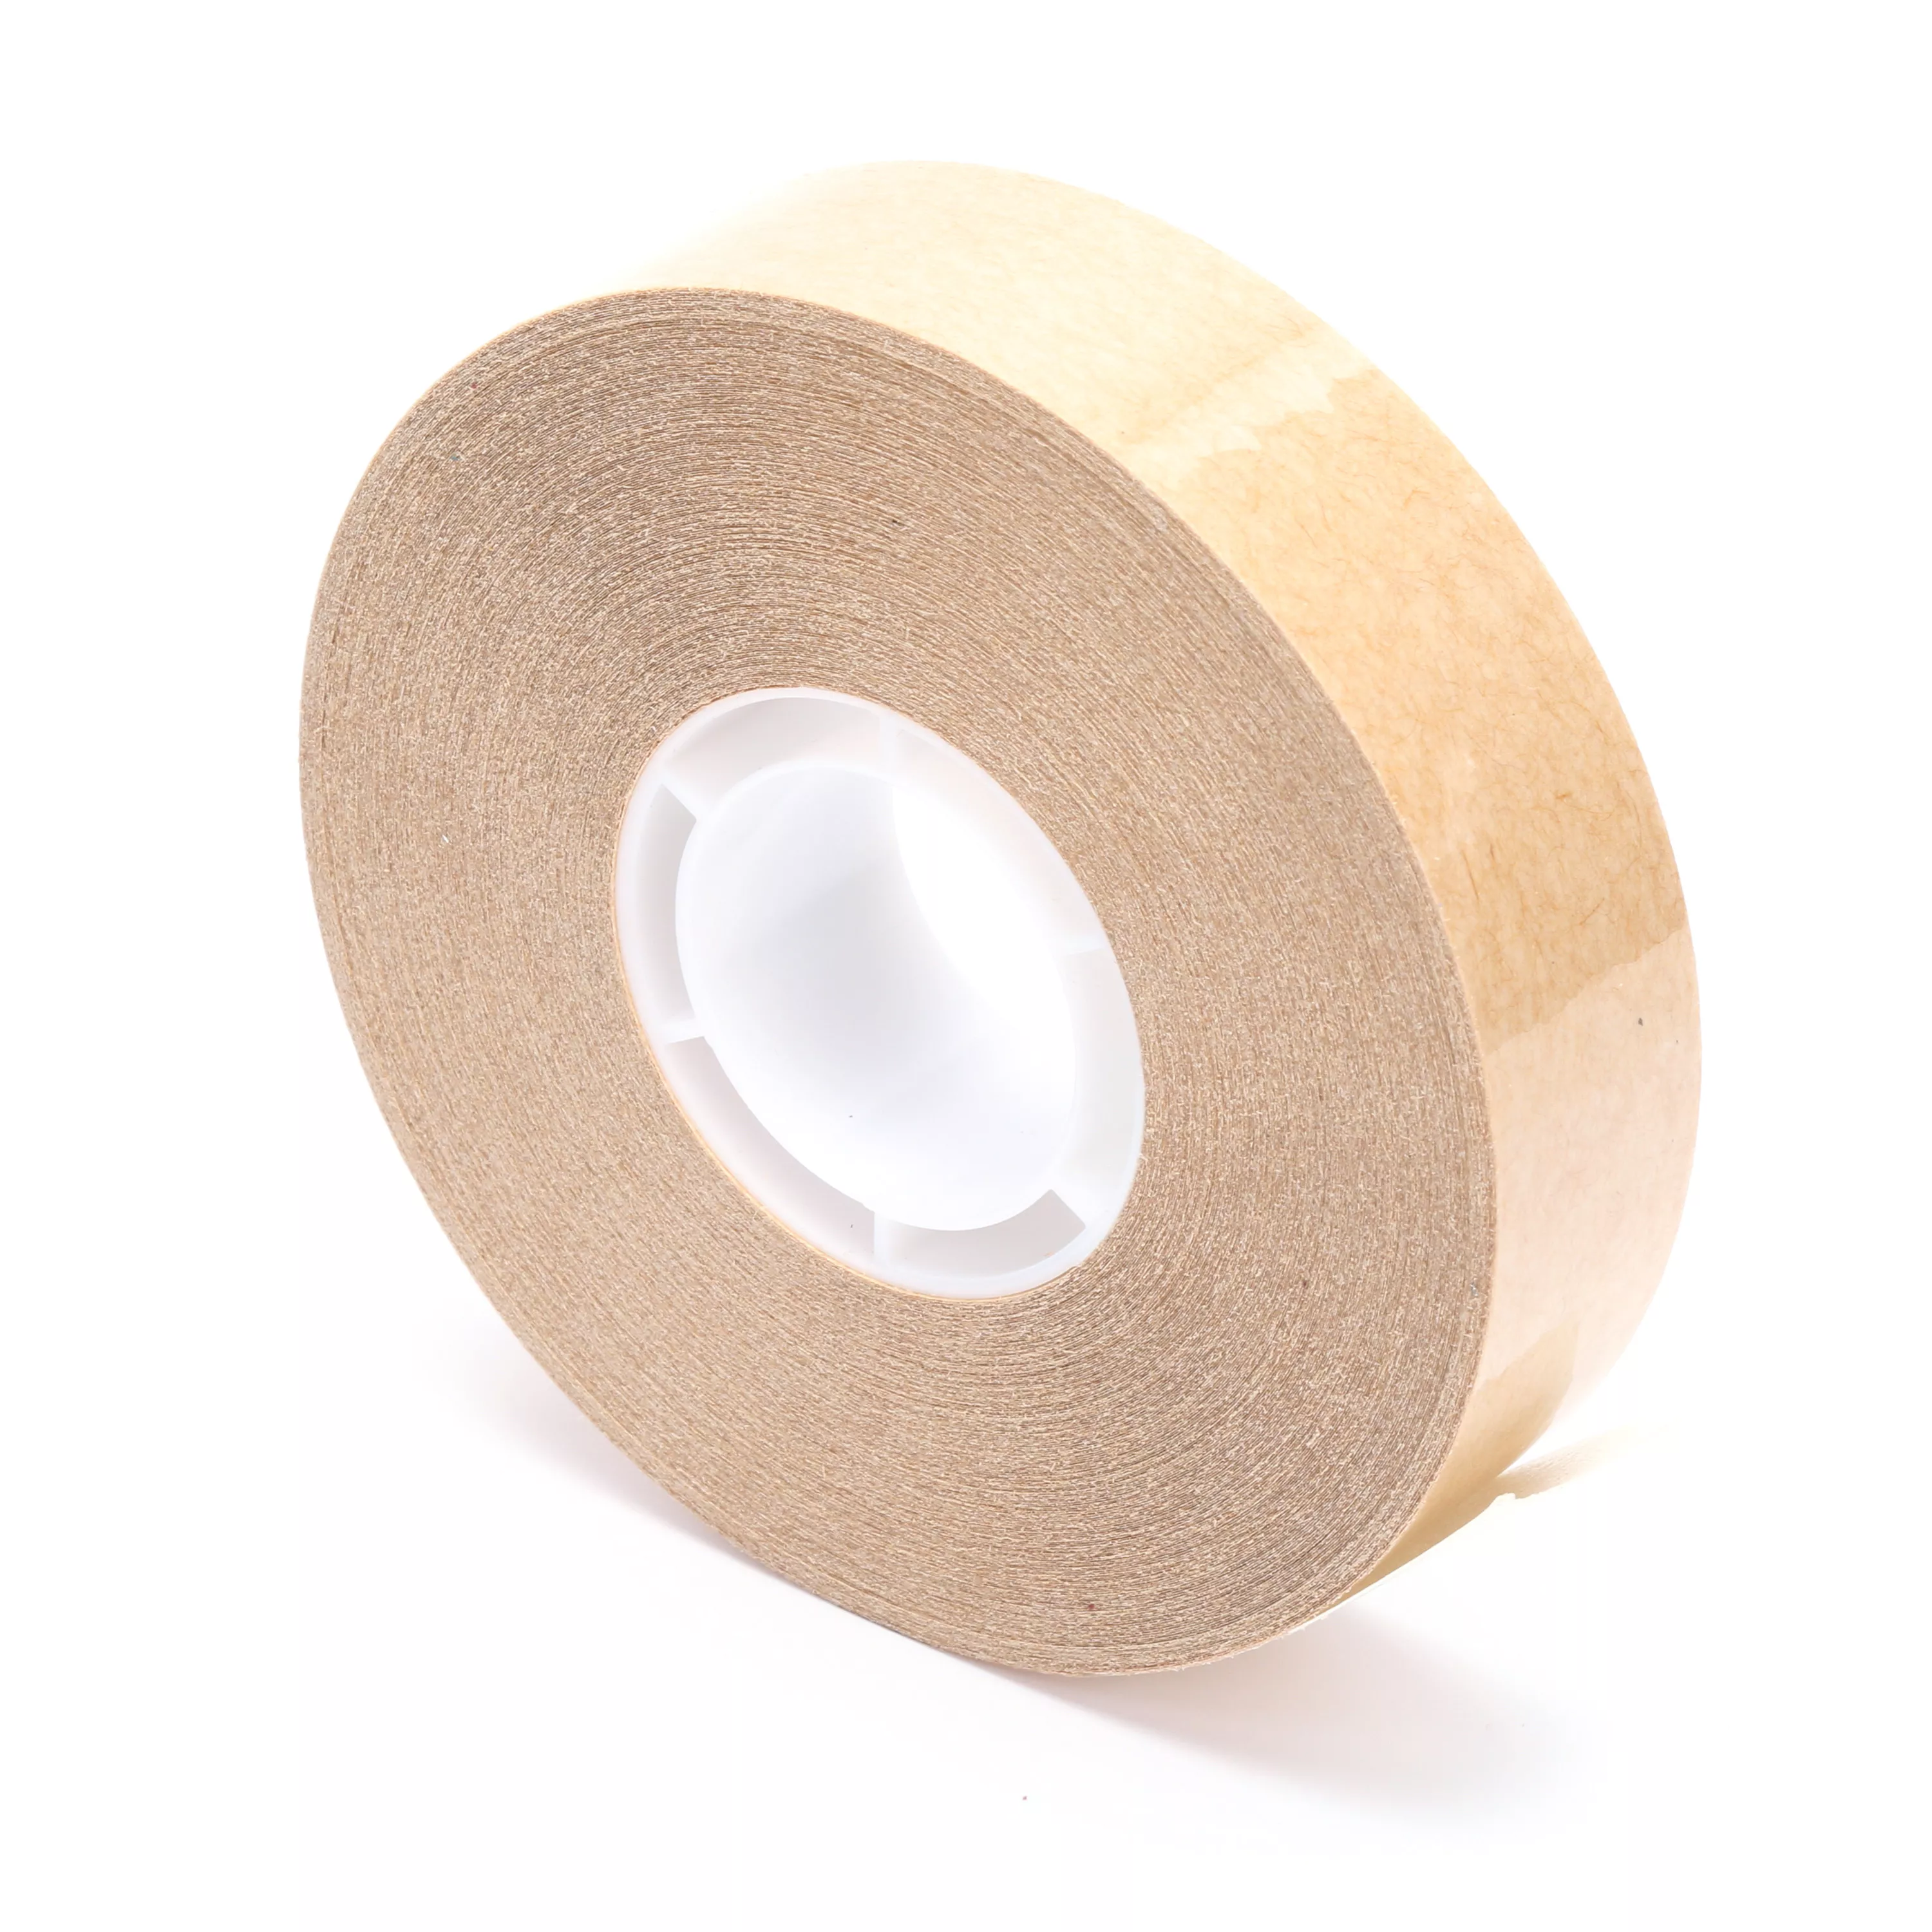 3M™ ATG Adhesive Transfer Tape 987, Clear, 3/4 in x 36 yd, 1.7 mil, (12
Roll/Carton) 48 Roll/Case